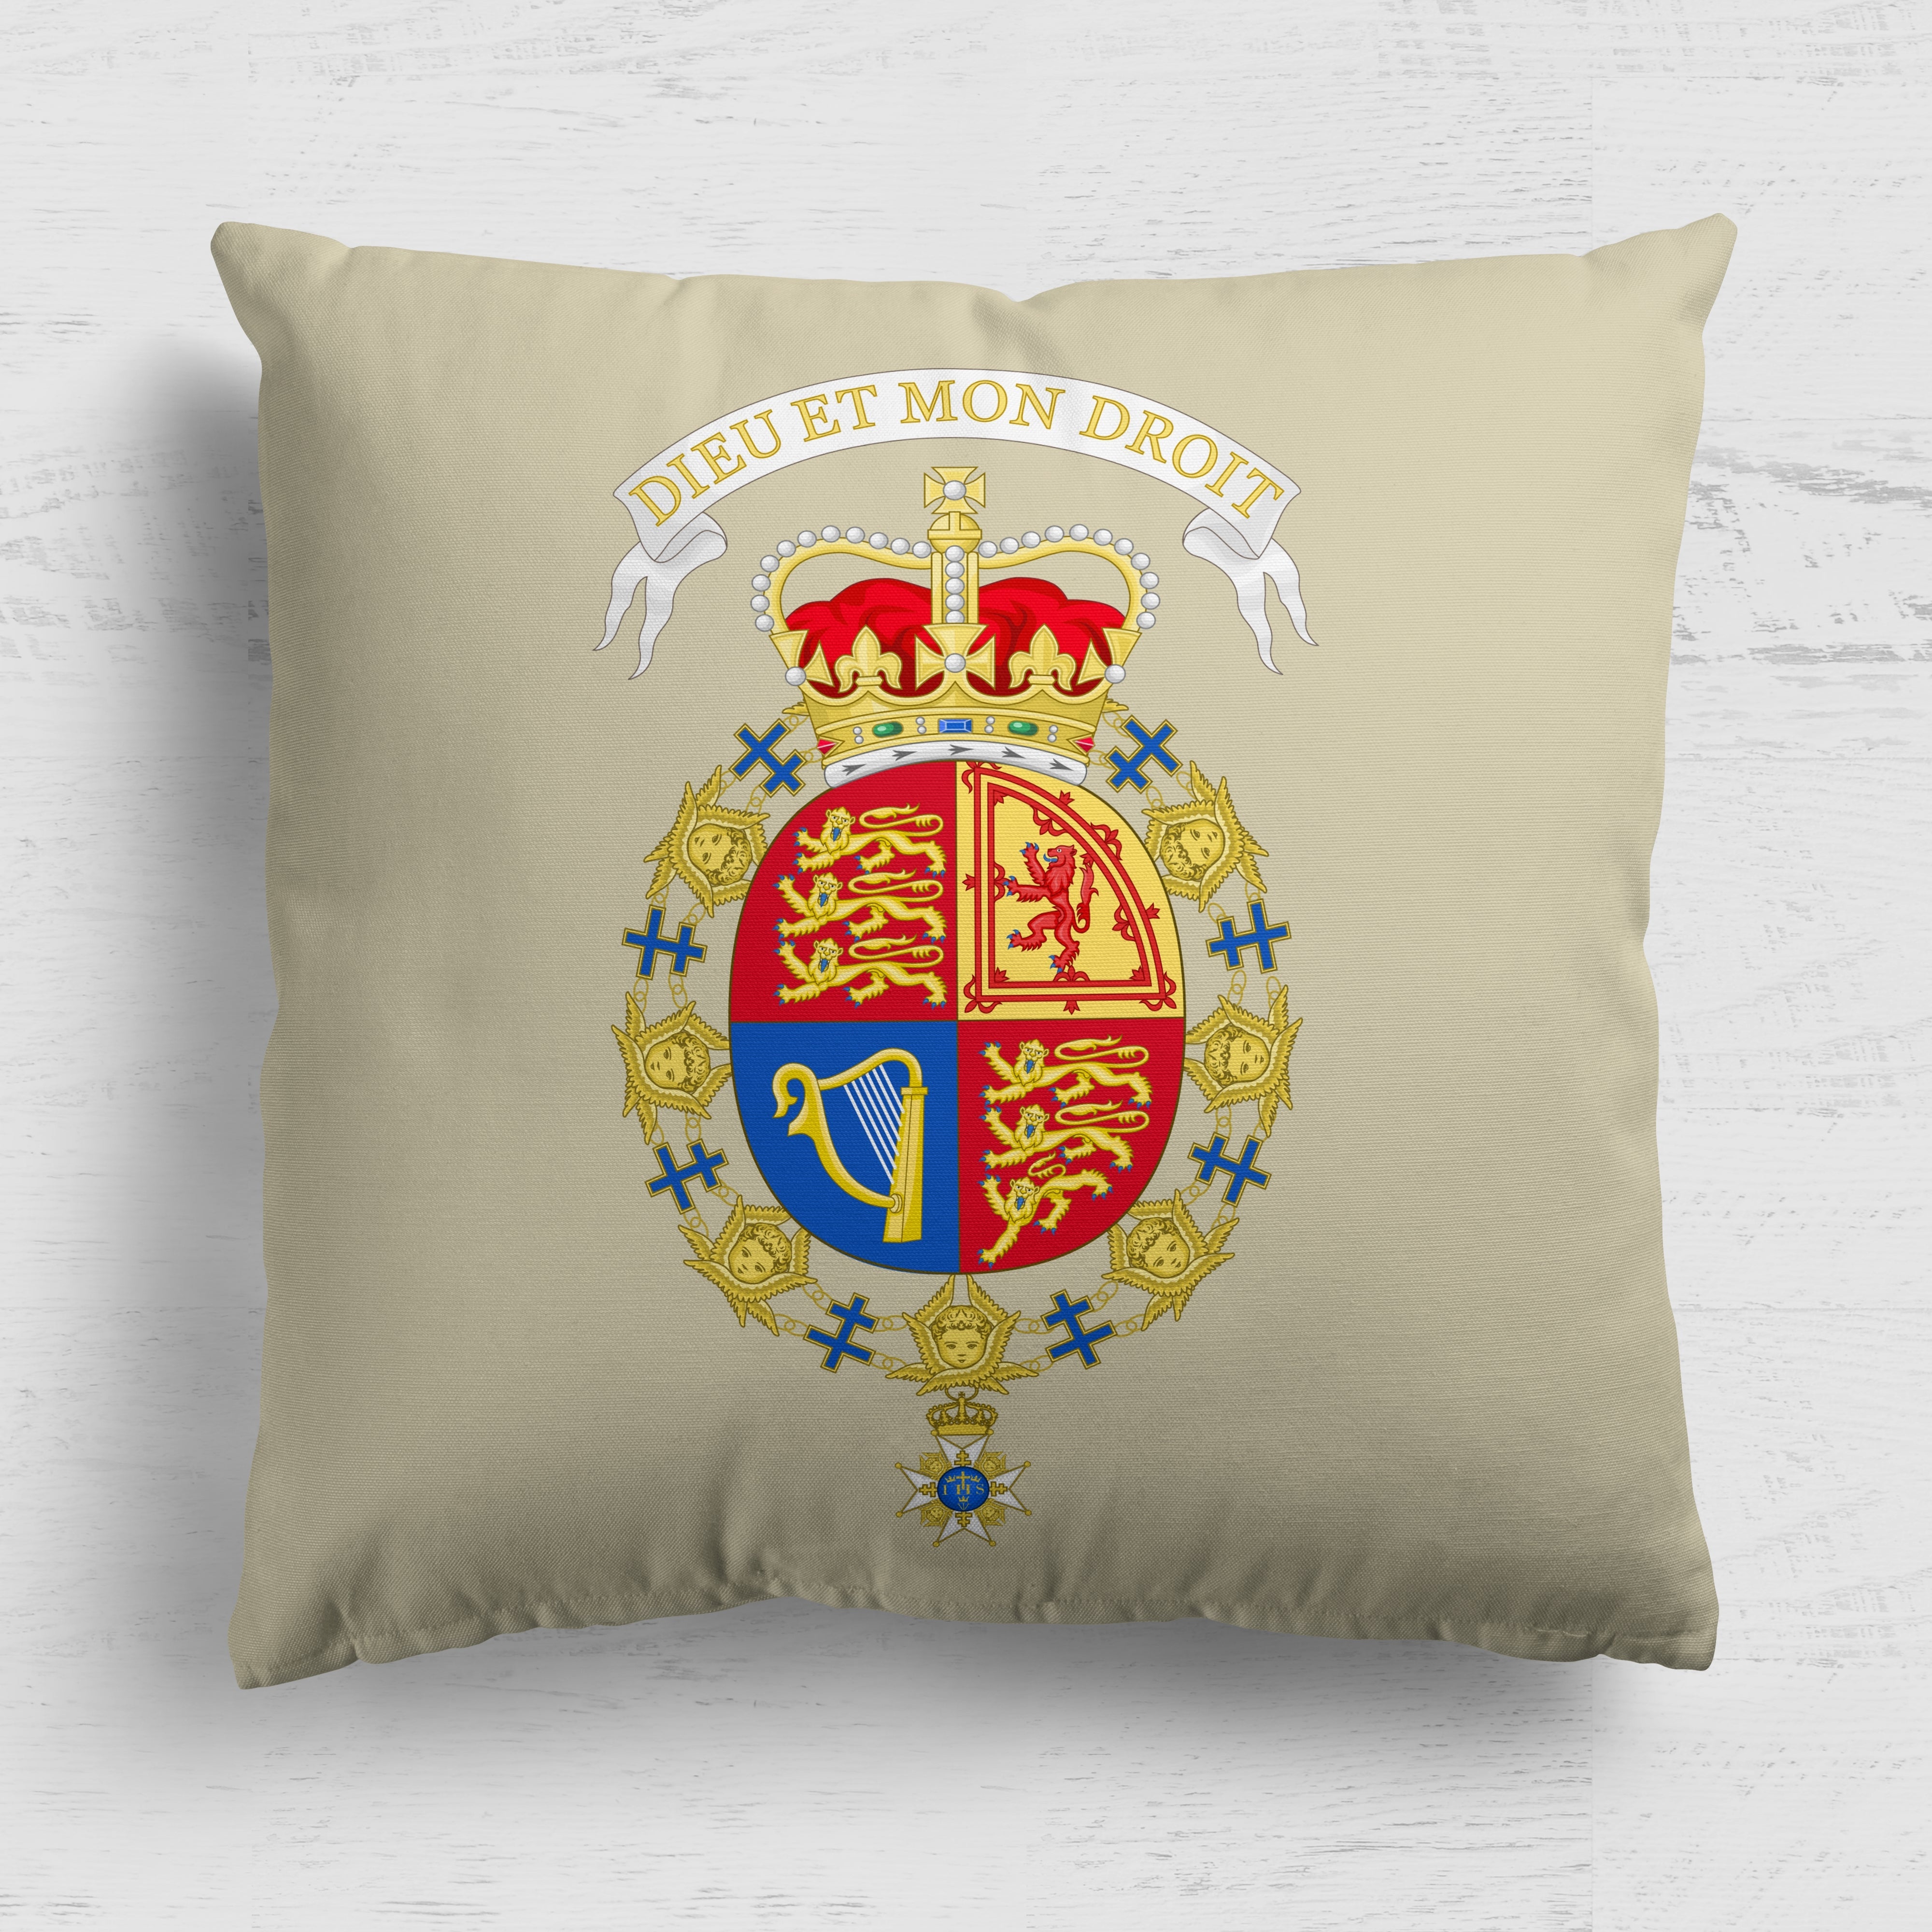 Cotton Rich Jubilee Cushion Panel With Backing Panel- Queen Arms